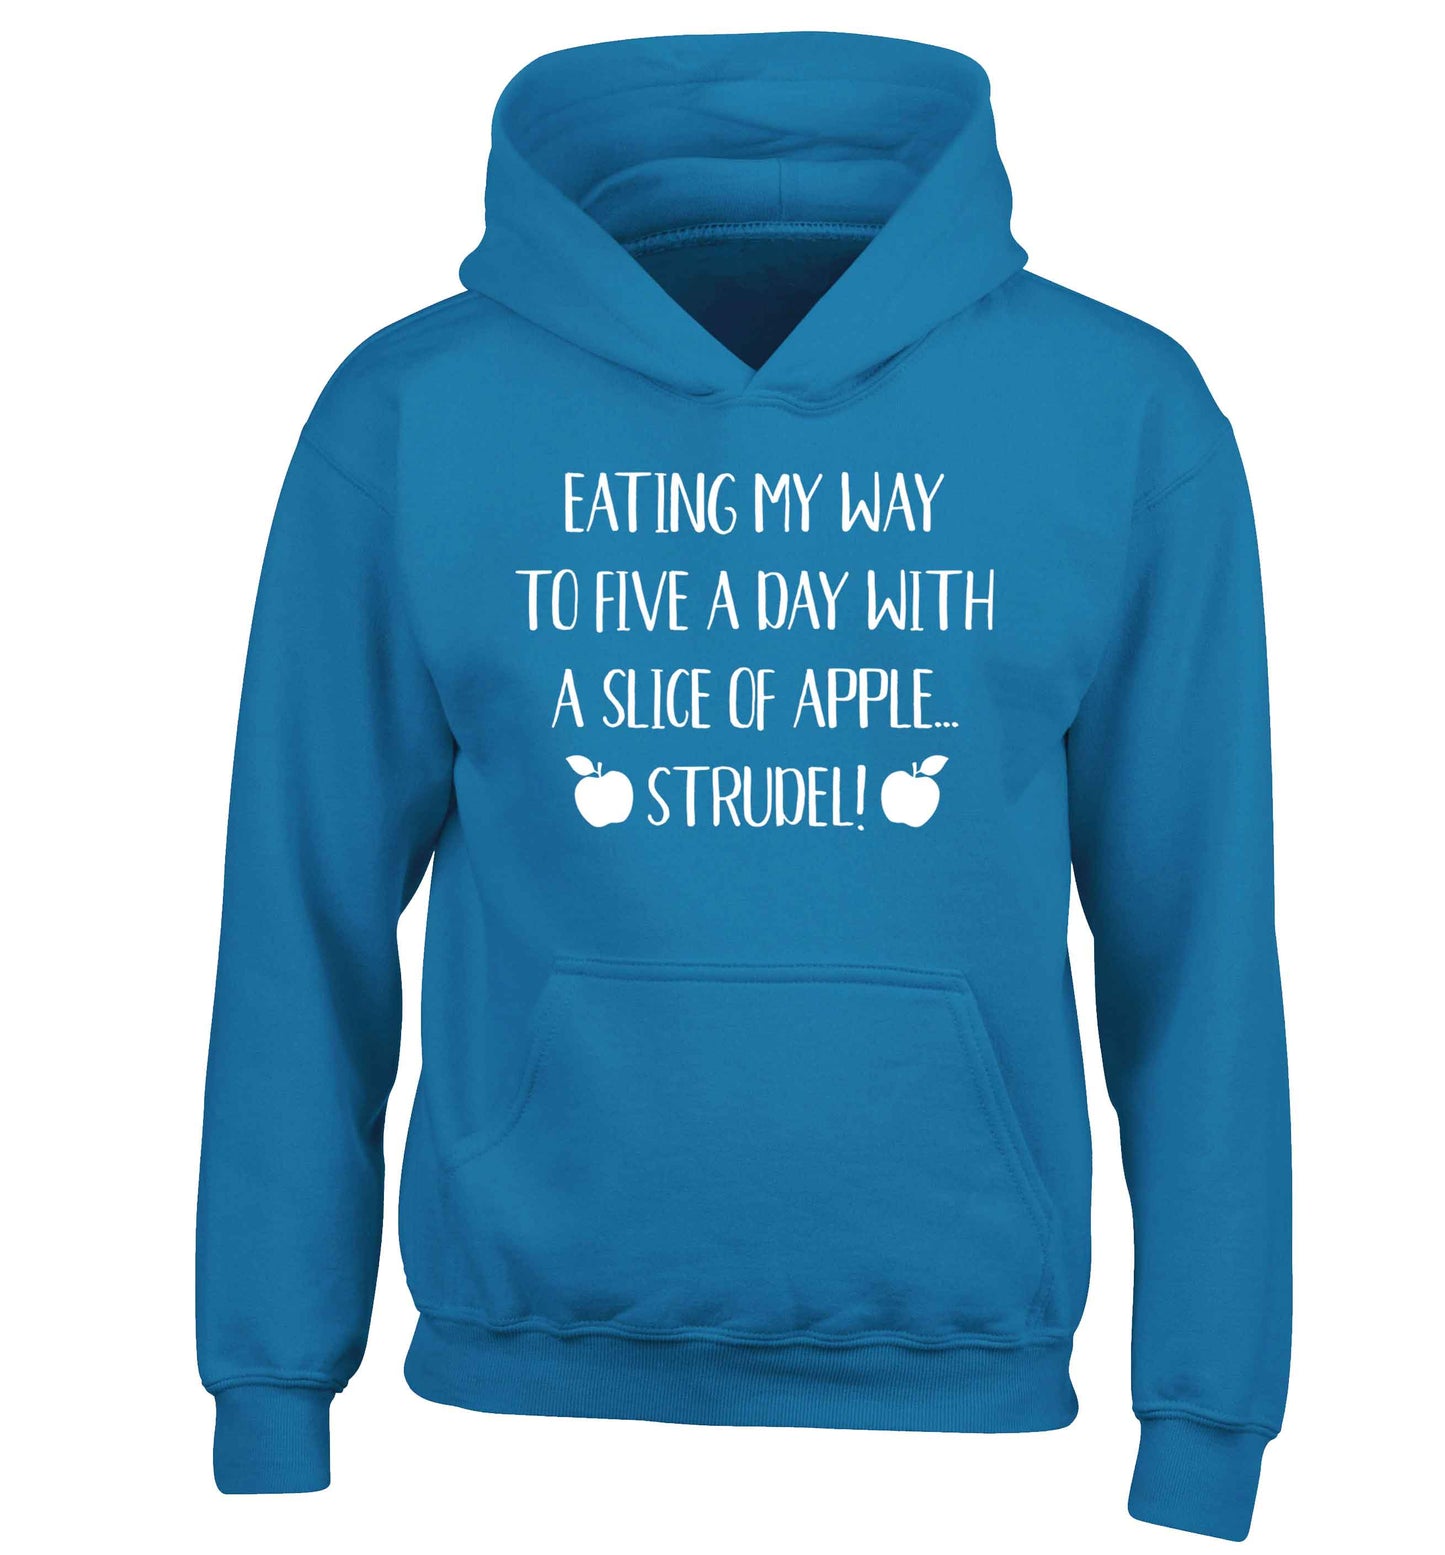 Eating my way to five a day with a slice of apple strudel children's blue hoodie 12-13 Years